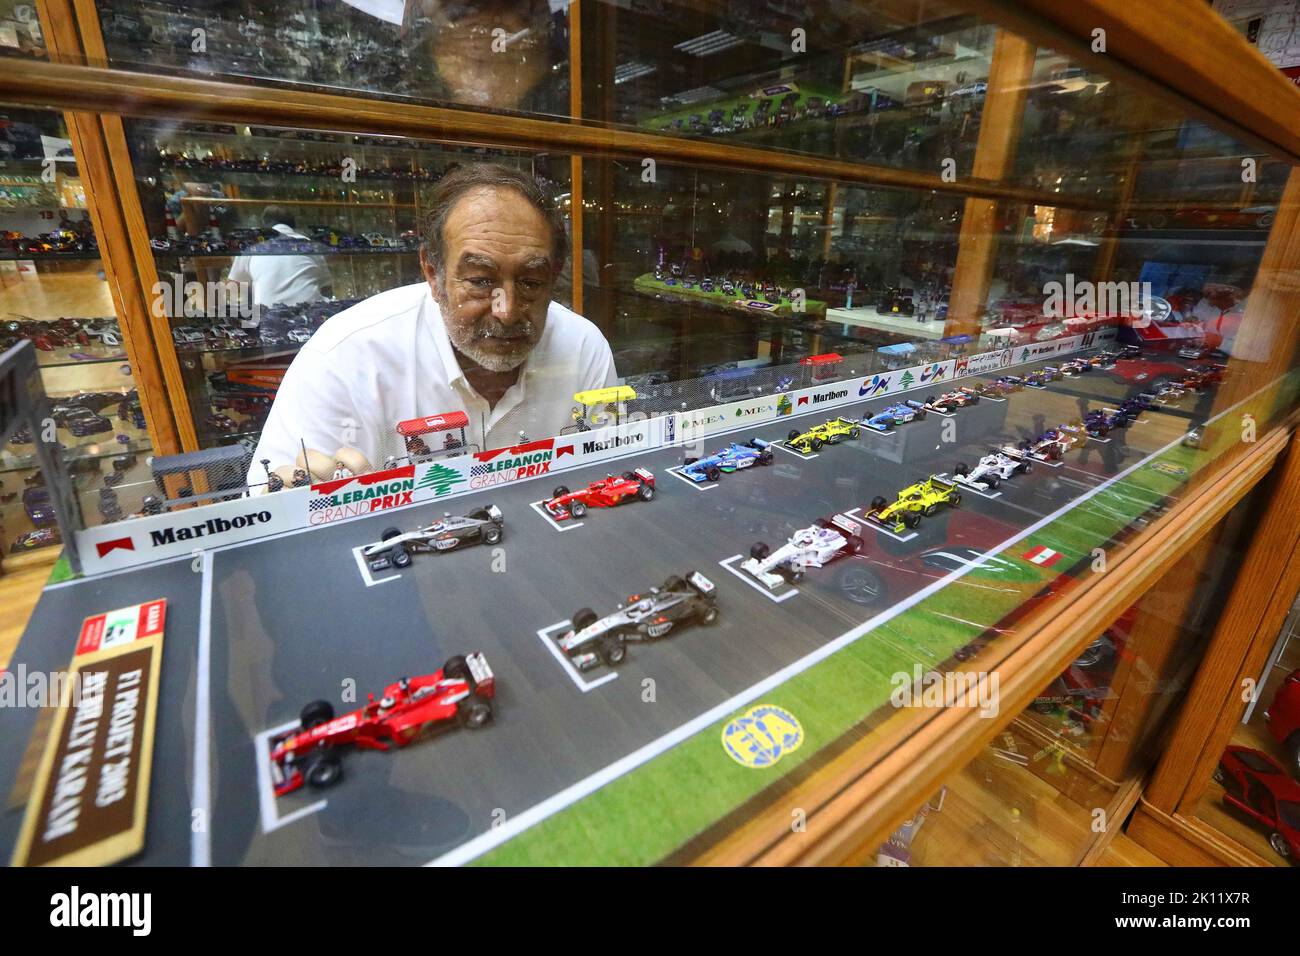 Beirut, Lebanon. 12th Sep, 2022. Nabil Karam looks at his collections at Billy Karam Museum in Zouk Mosbeh, Lebanon, Sept. 12, 2022. Lebanese race car champion Nabil Karam started his hobby of collecting mini sports cars 30 years ago. Today, the 65-year-old man has collected around 50,000 car miniatures from around the world. TO GO WITH 'Feature: Lebanese racer turns hobby into car museum' Credit: Bilal Jawich/Xinhua/Alamy Live News Stock Photo